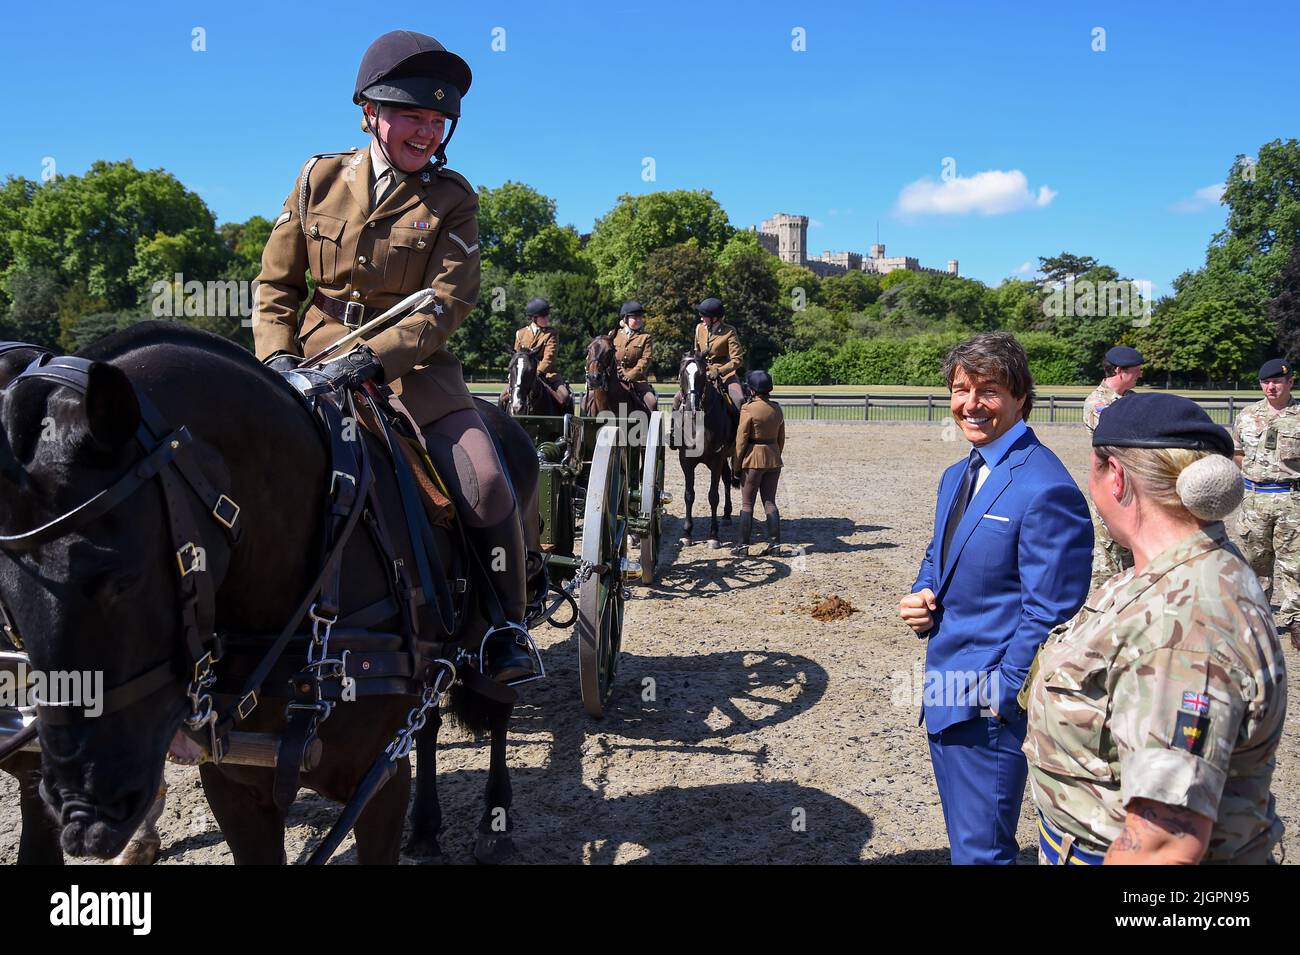 Windsor Castle, Windsor, Berkshire, UK. 8th July 2022. EMBARGOED UNTIL 12th JULY  Tom Cruise meeting members of the King's Troop Royal Horse Artillery, who he introduced during the Platinum Jubilee Celebration back in May, on a private visit in the Private Grounds of Windsor Castle   Credit:Peter Nixon/Alamy Live News Stock Photo